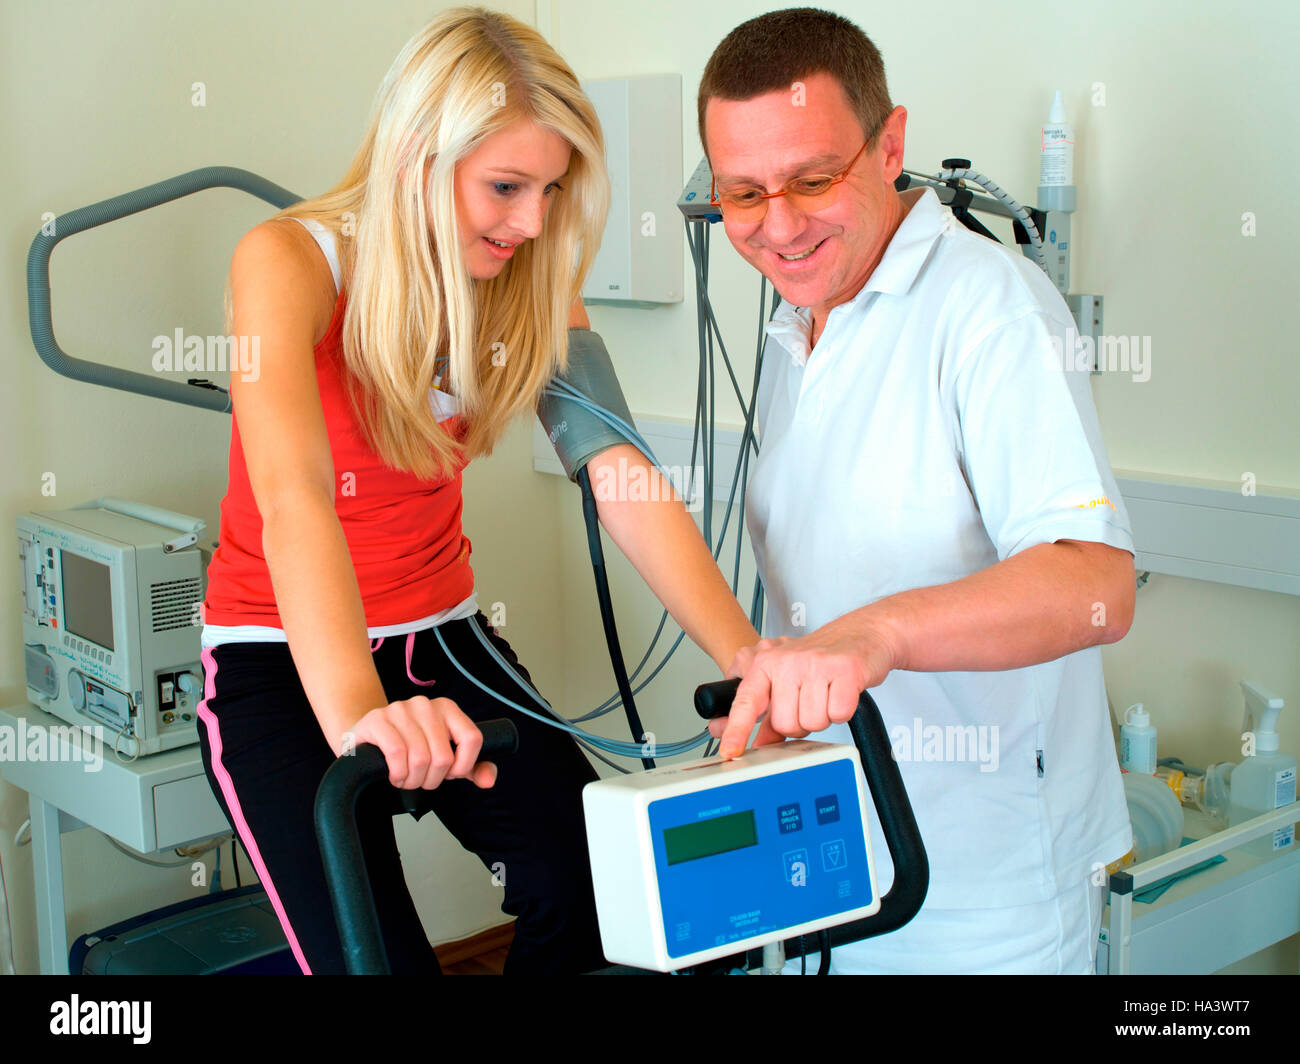 Doctor conducting an ergometer test in a medical practice with a young woman Stock Photo